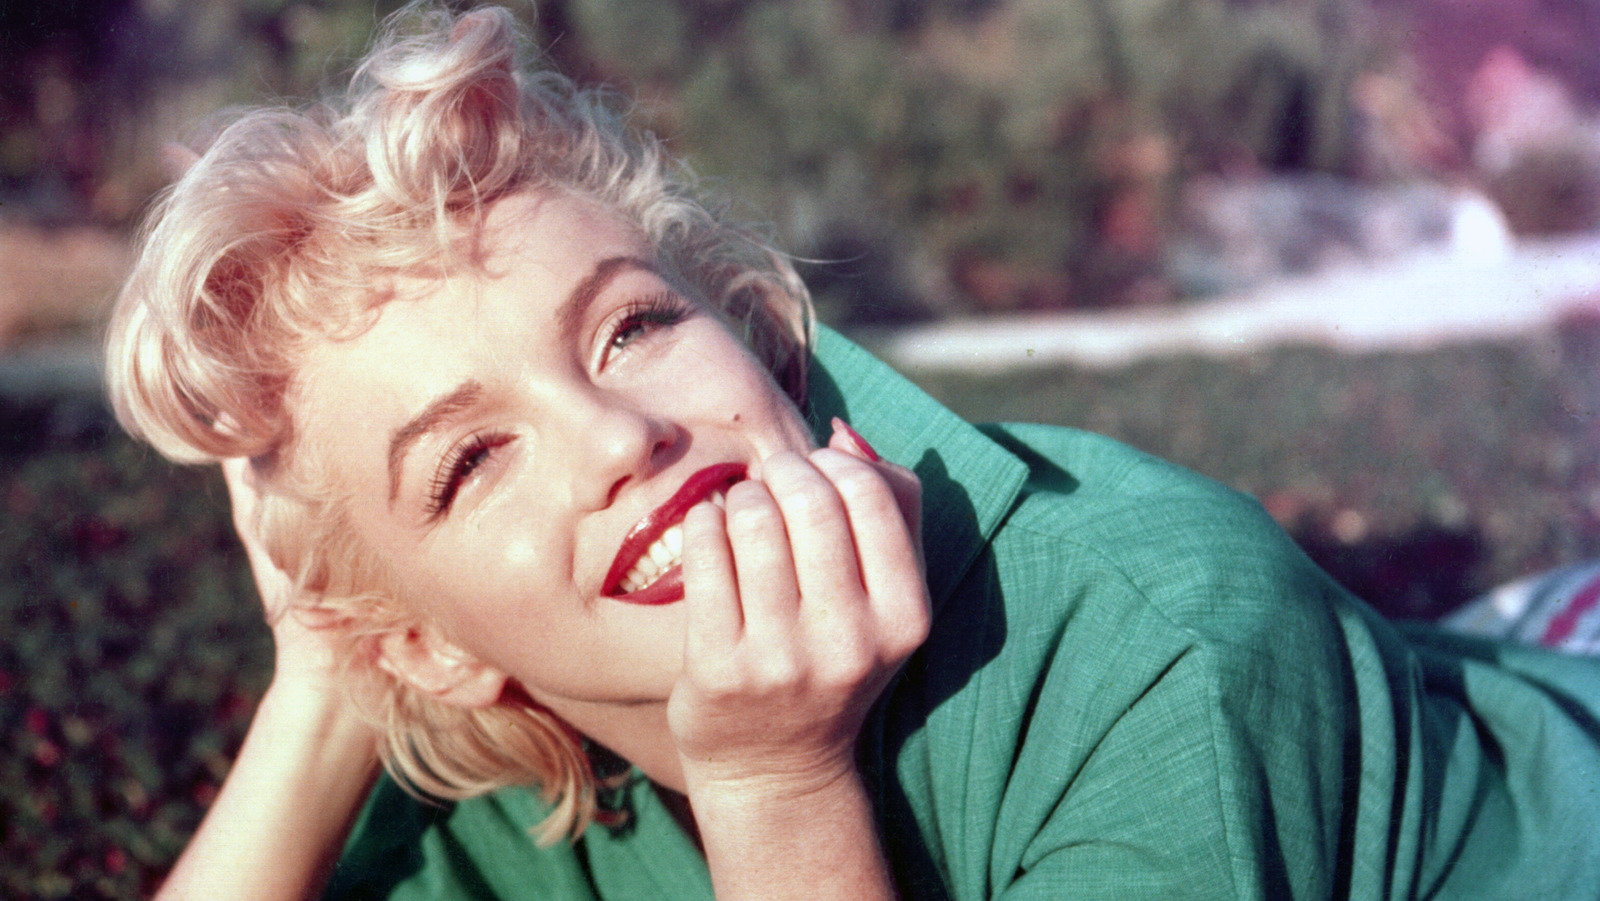 How To Do Your Hair So It Looks Like Marilyn Monroe's